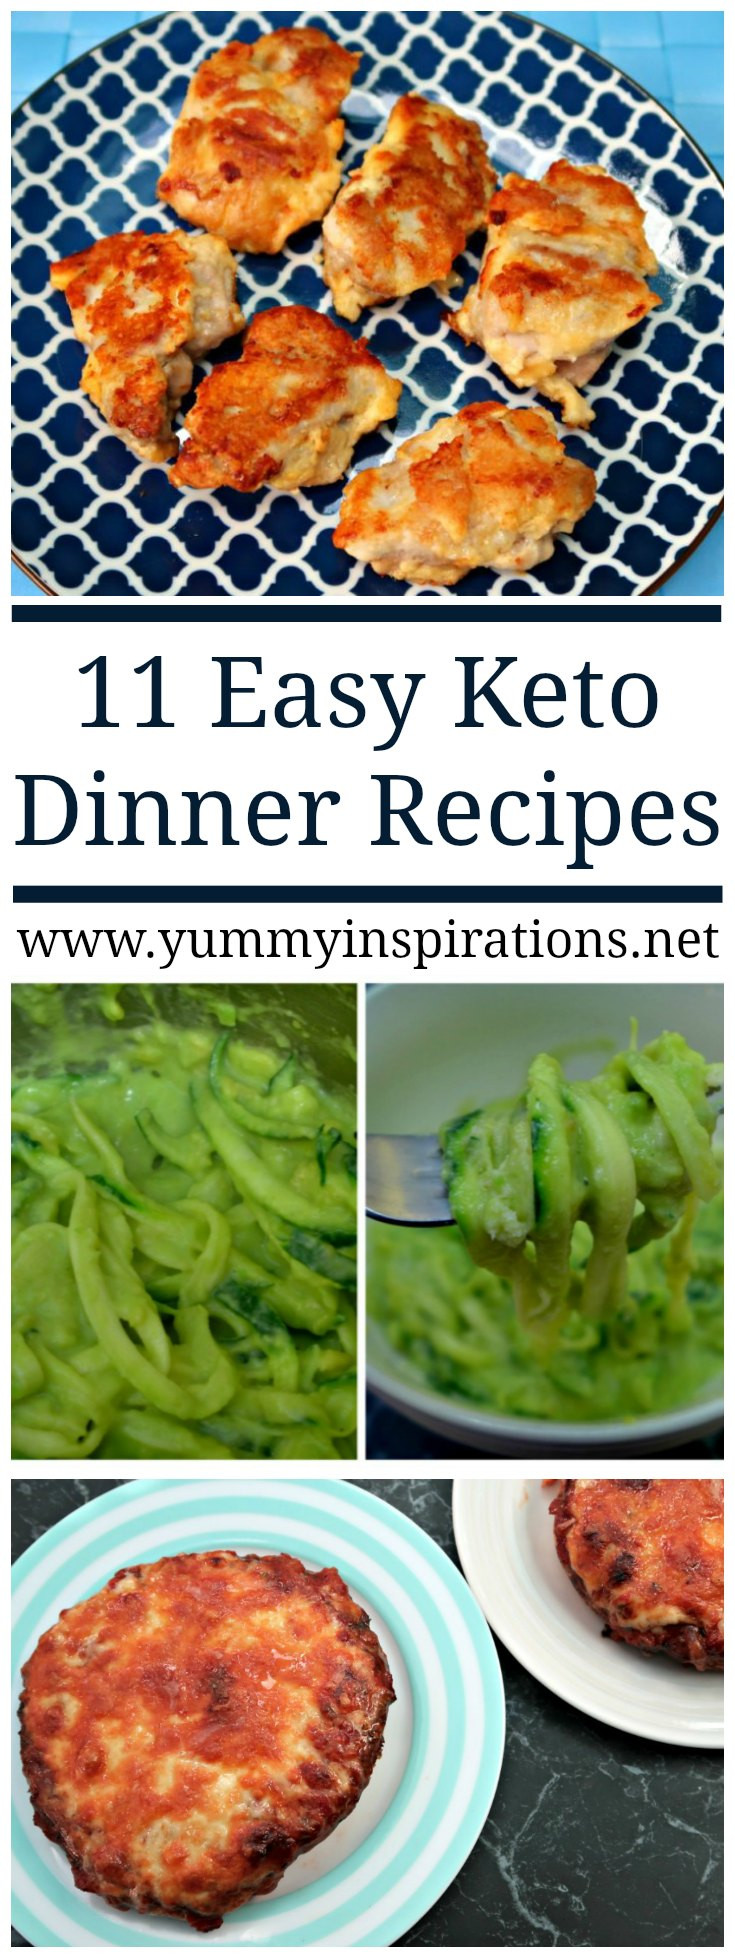 Keto Diet Recipes Dinners Easy
 11 Easy Keto Dinner Recipes Quick Low Carb Ketogenic